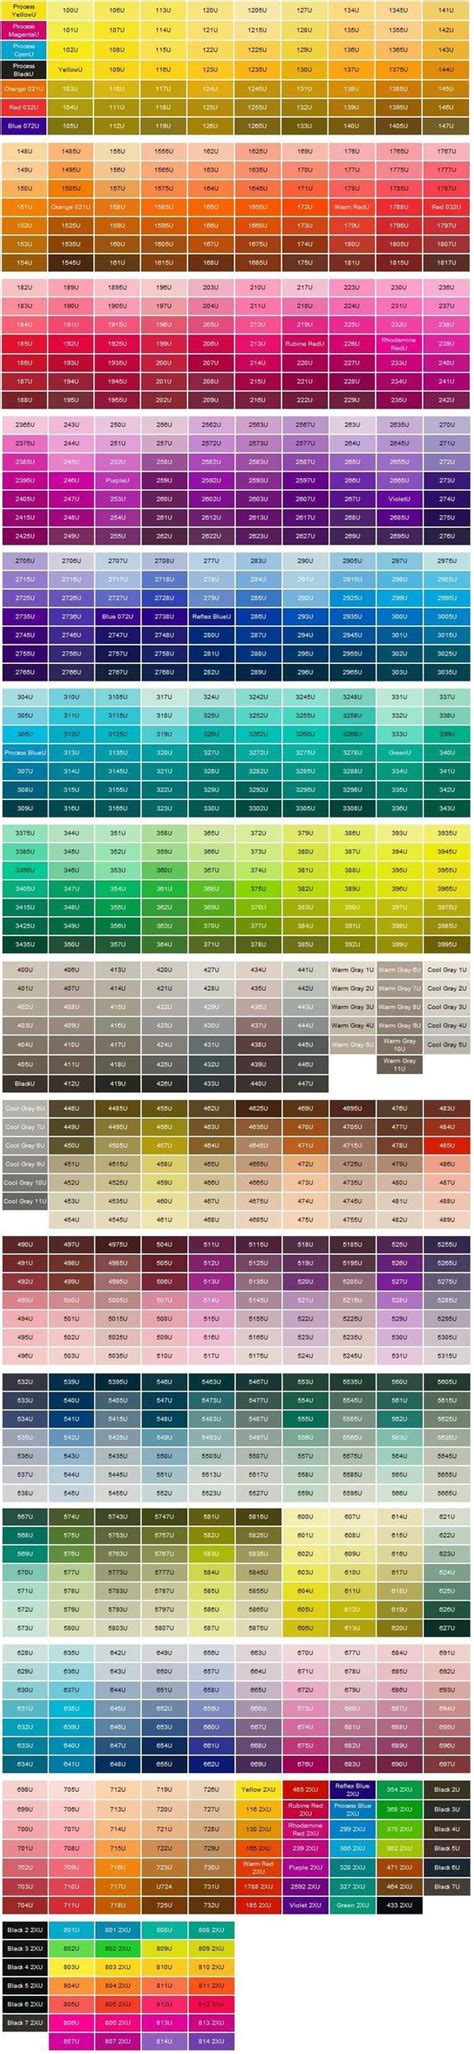 An Image Of The Color Chart For Each Type Of Item In This Page It